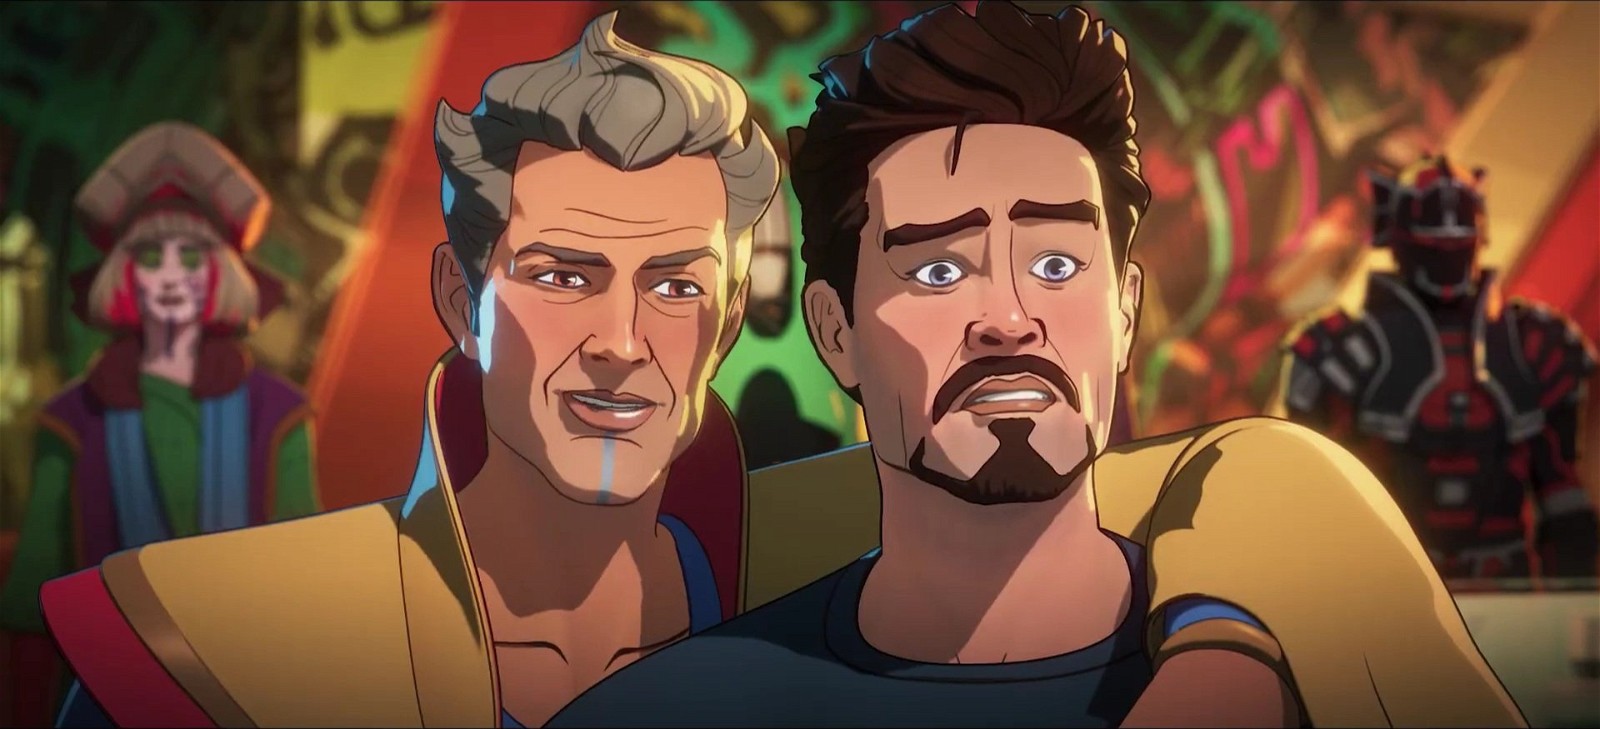 A third season of What If? and other Marvel animated shows are coming